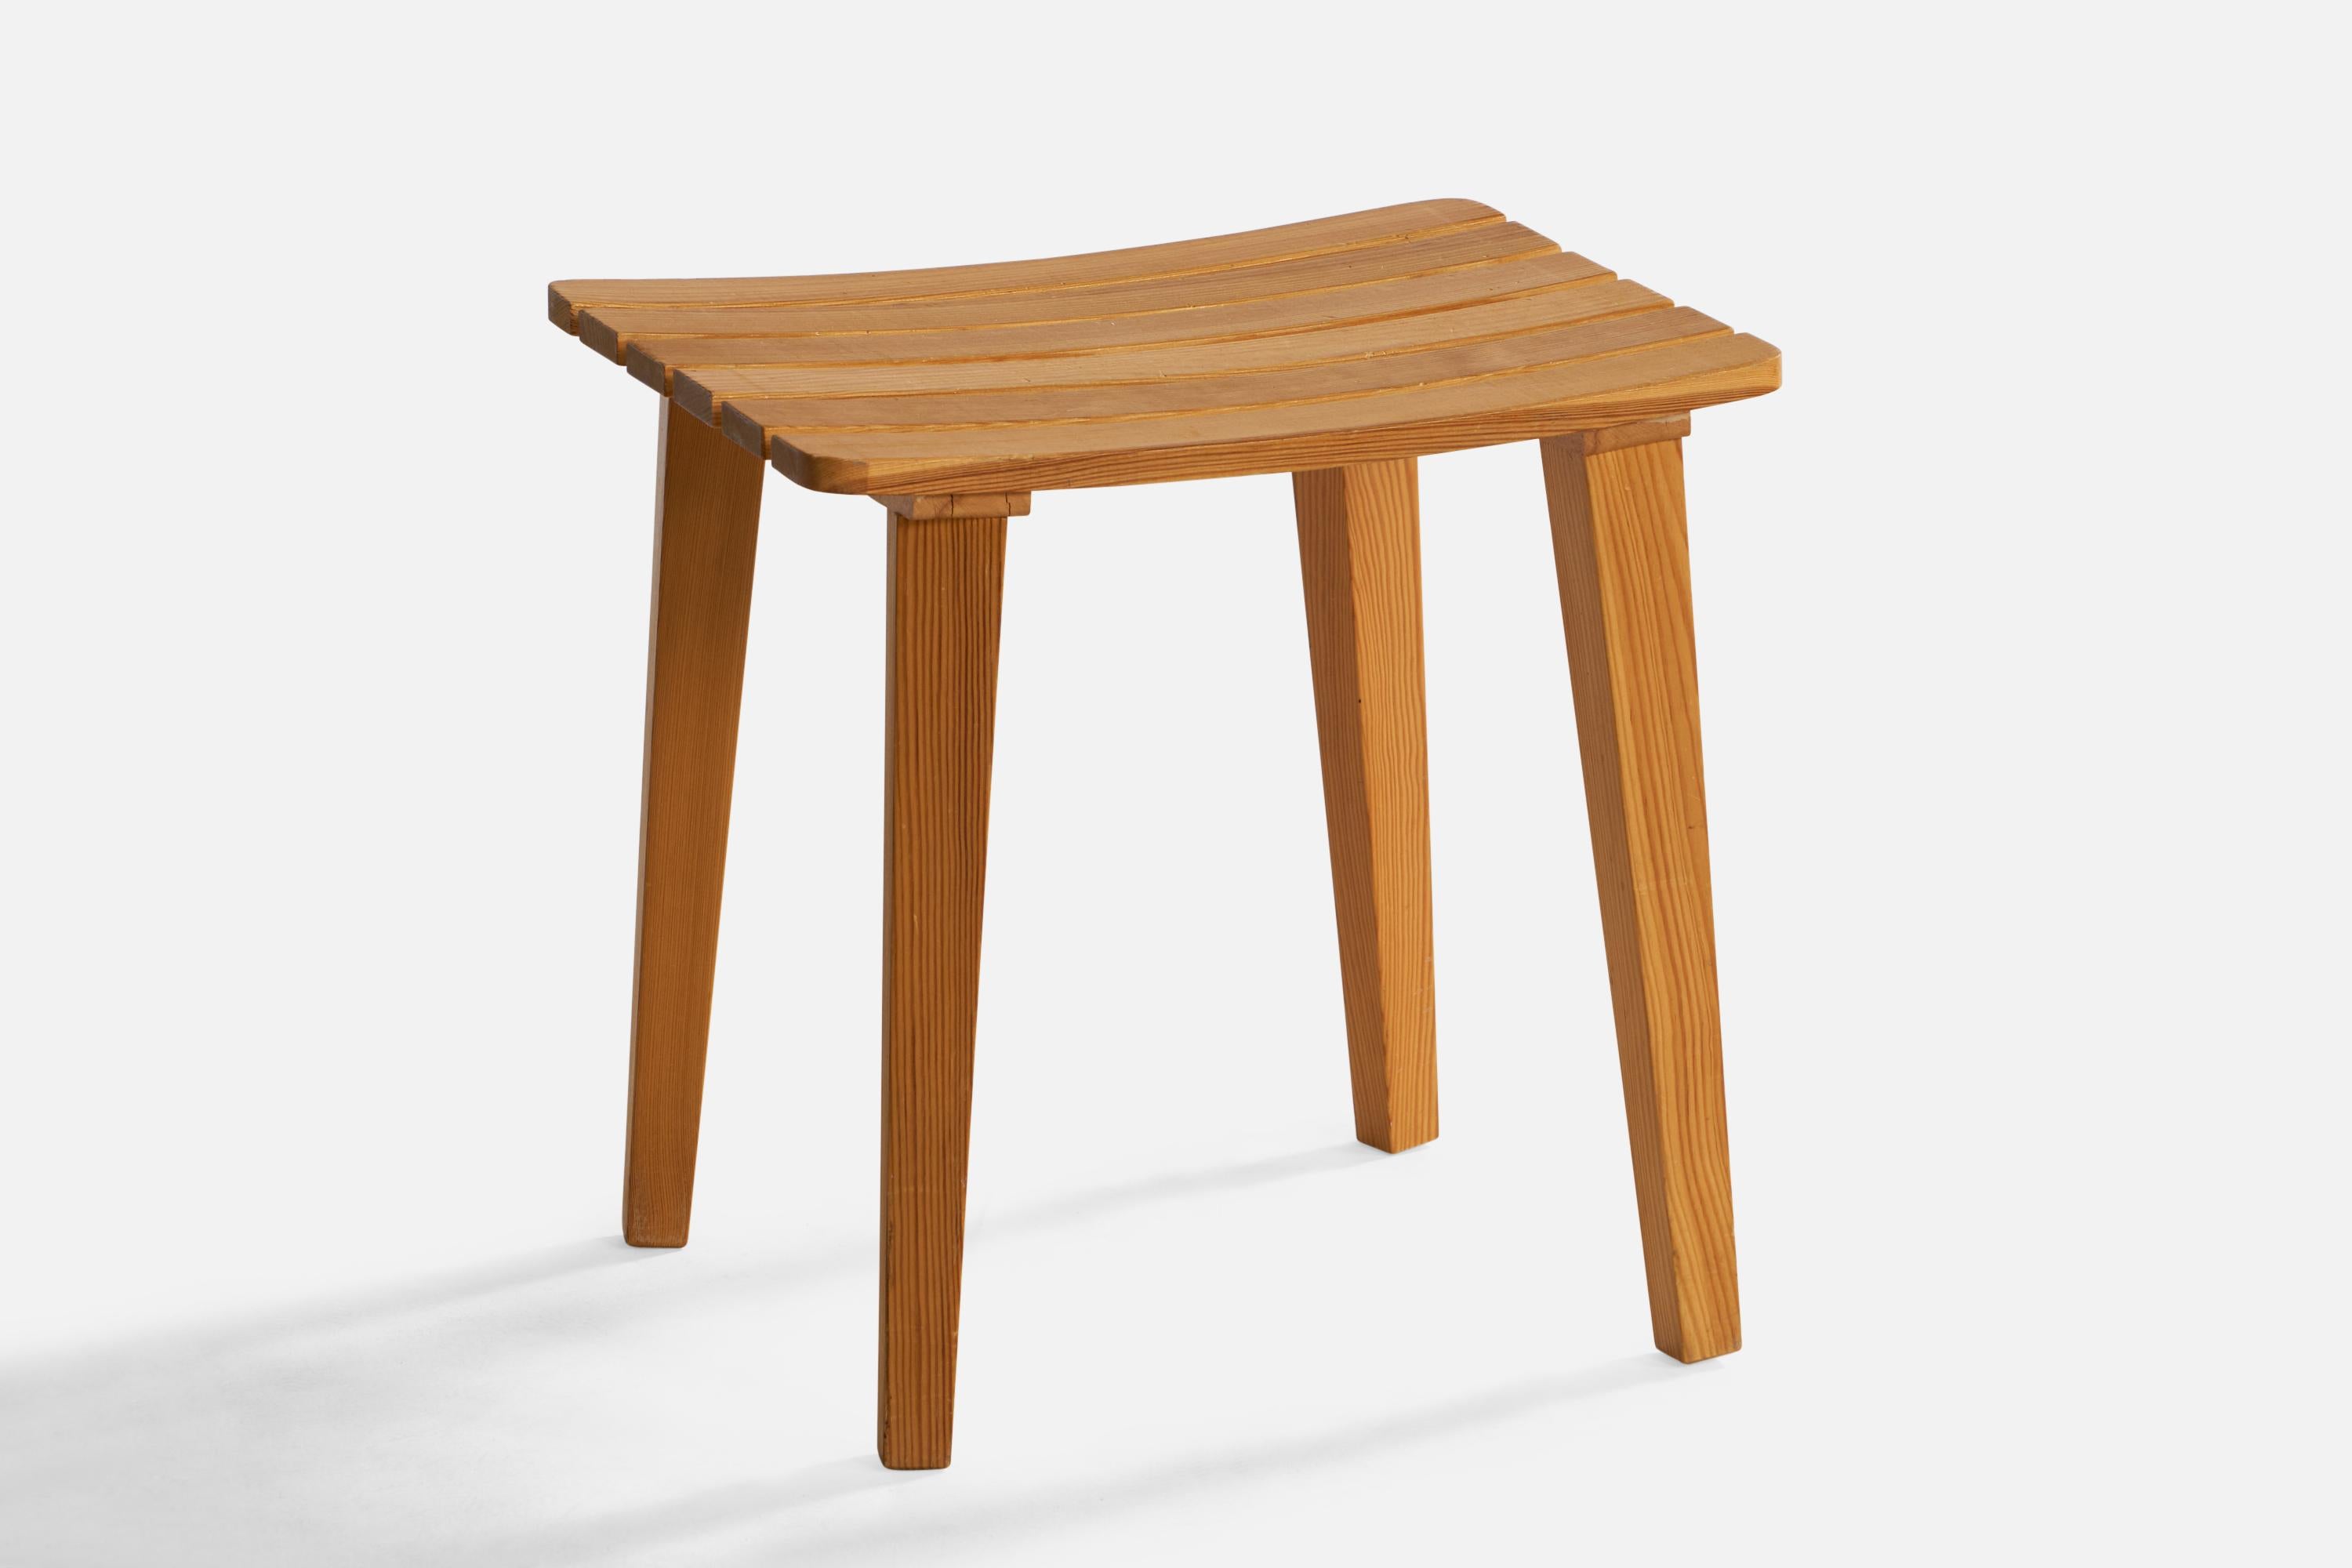 A pine stool designed and produced in Sweden, 1970s.

Seat height: 16.1